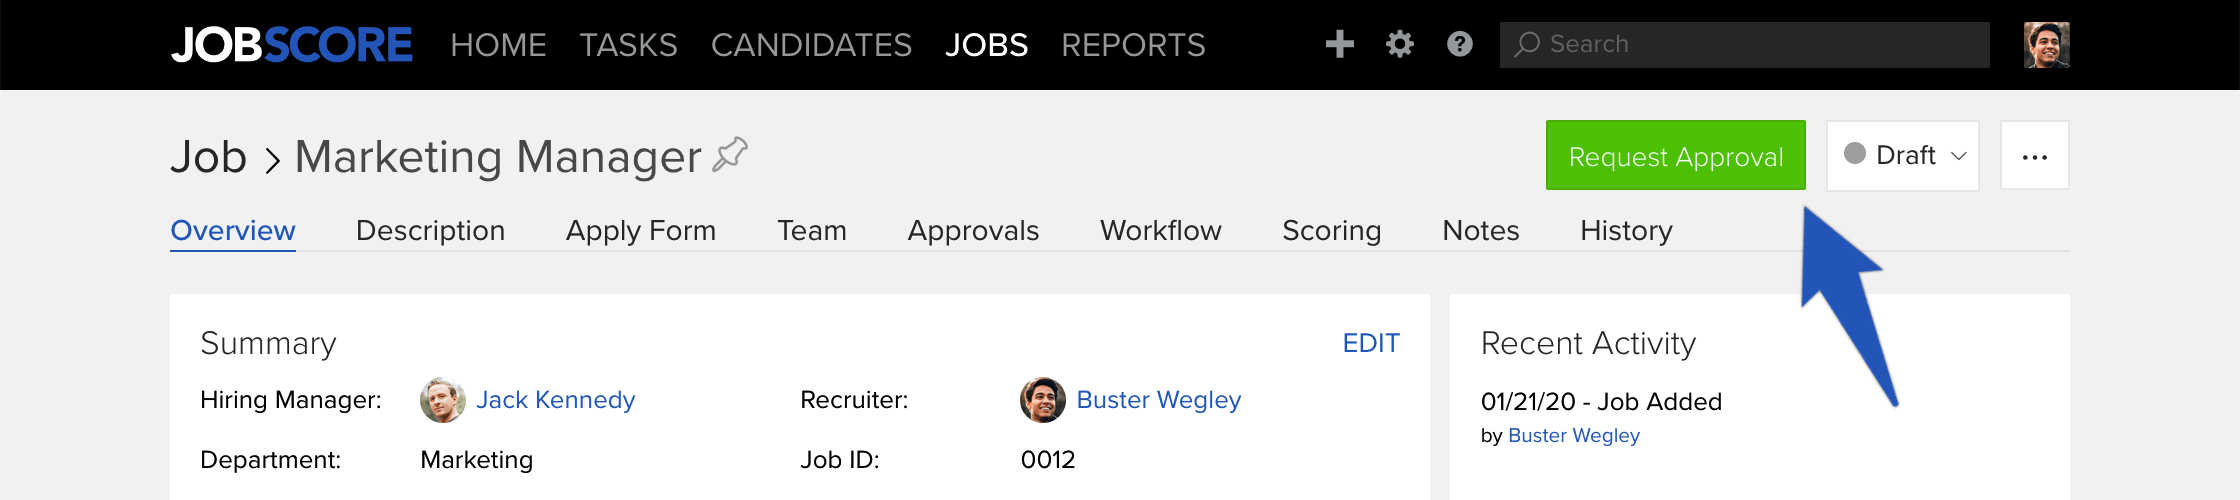 request approval button on the view job page